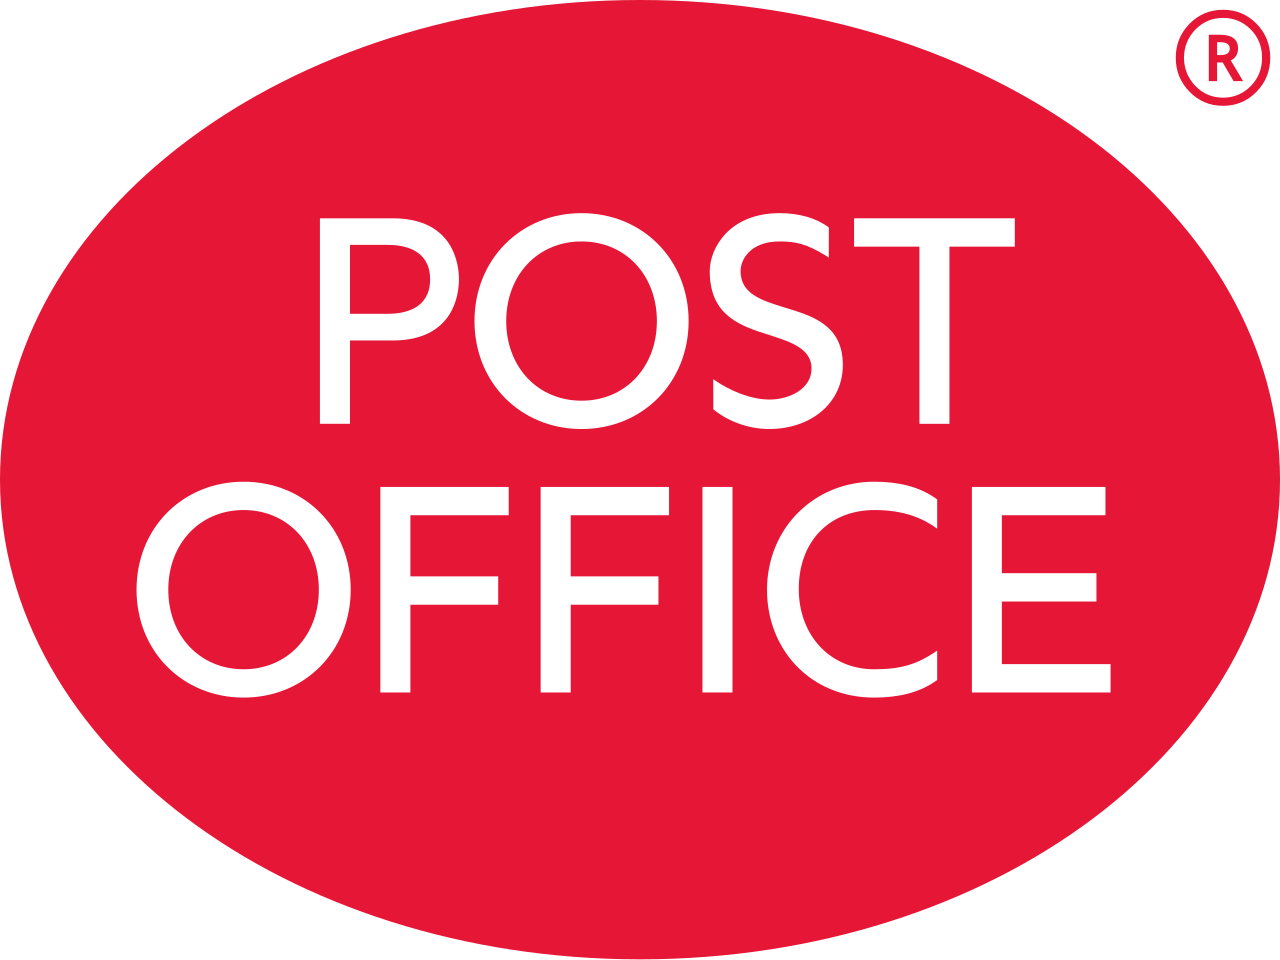 Post office and Internet service in Danang city, Vietnam